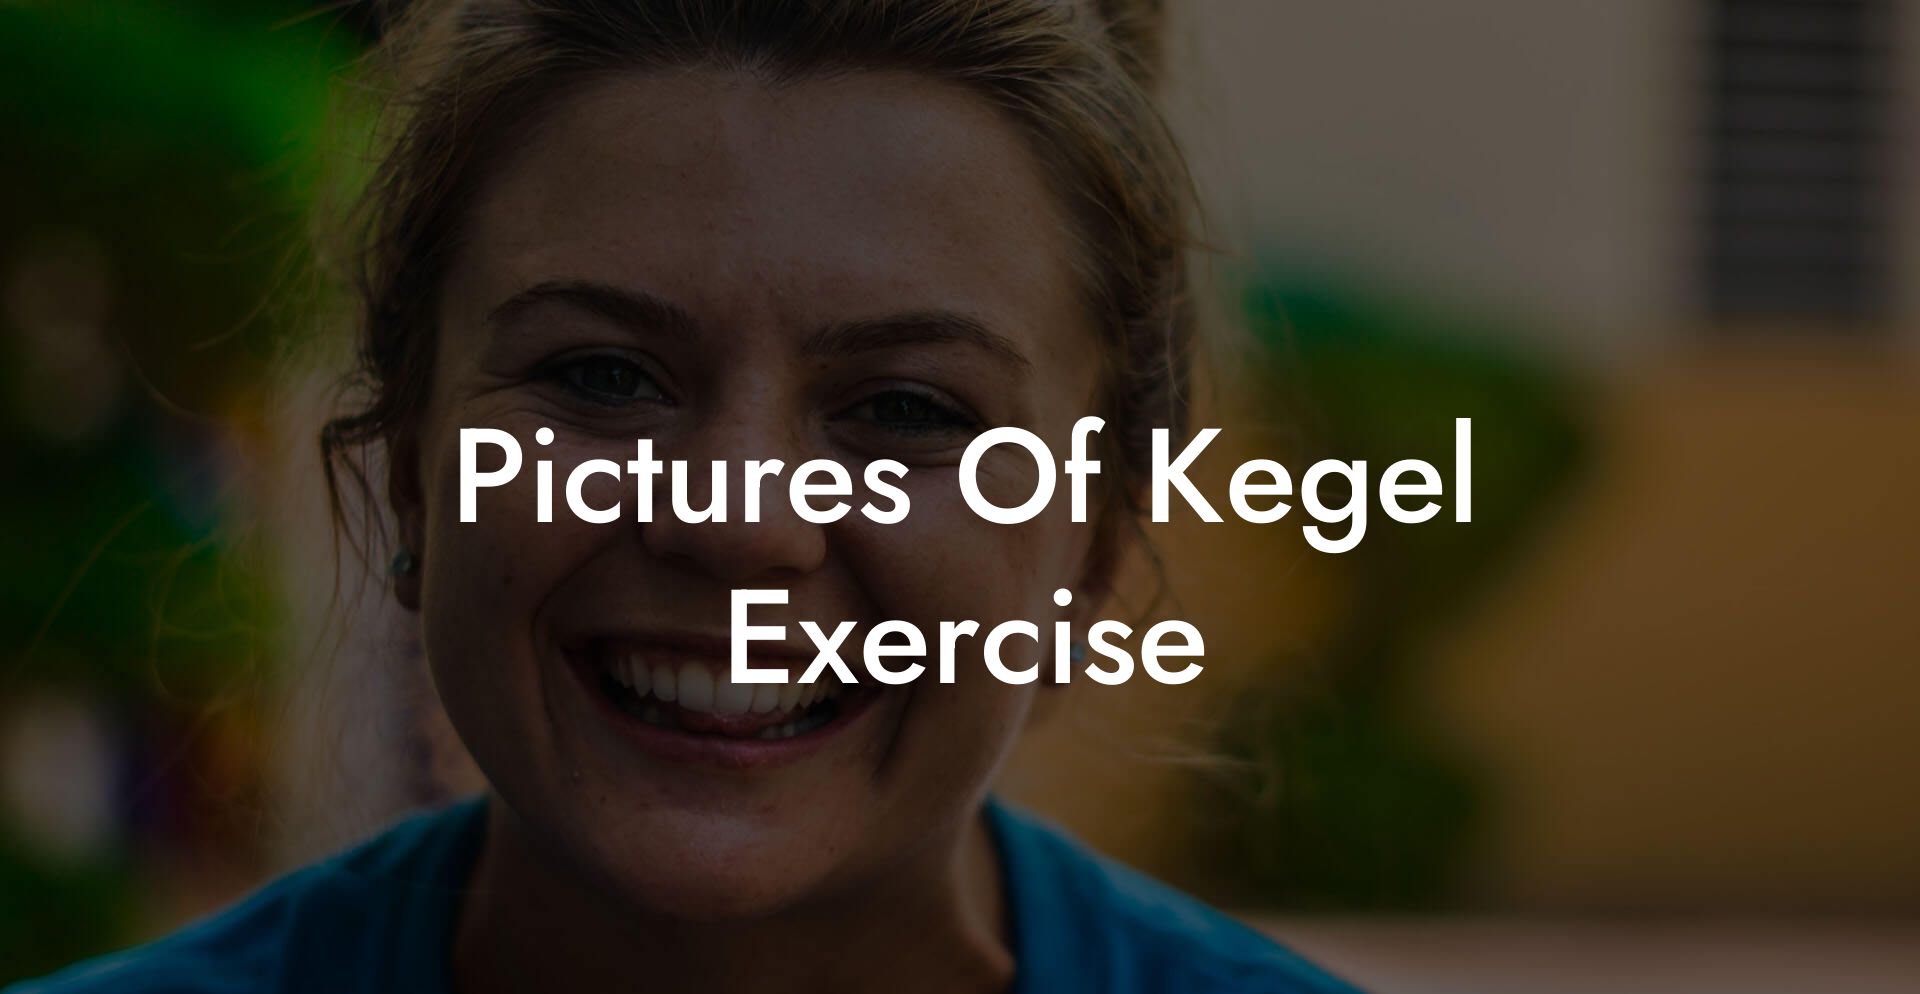 Pictures Of Kegel Exercise